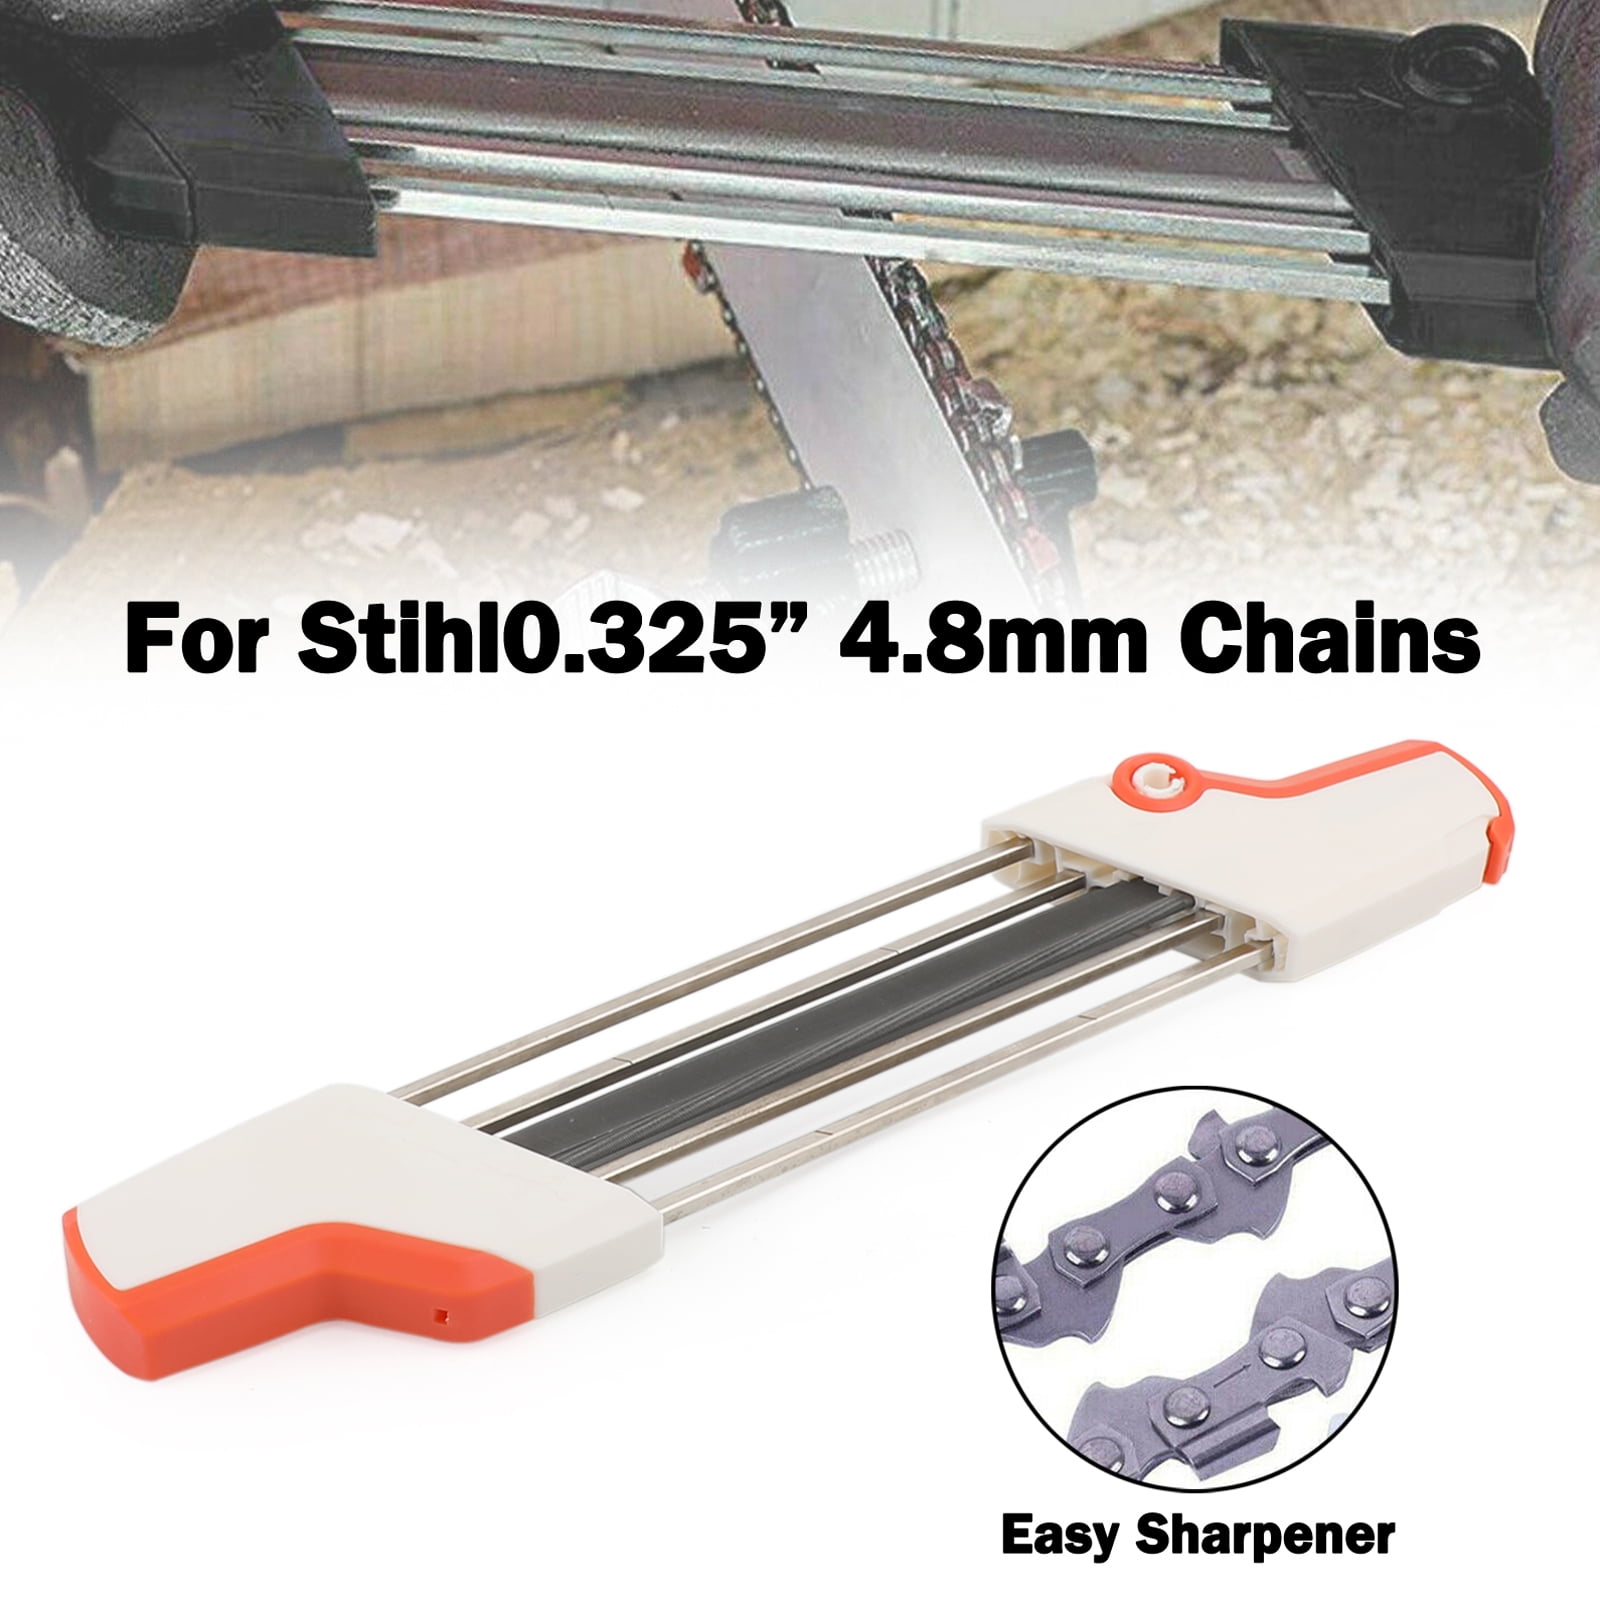 3/8" PICCO Chainsaw Stihl 7010 871 0395 Replacement Files for Sharpening 1/4" 